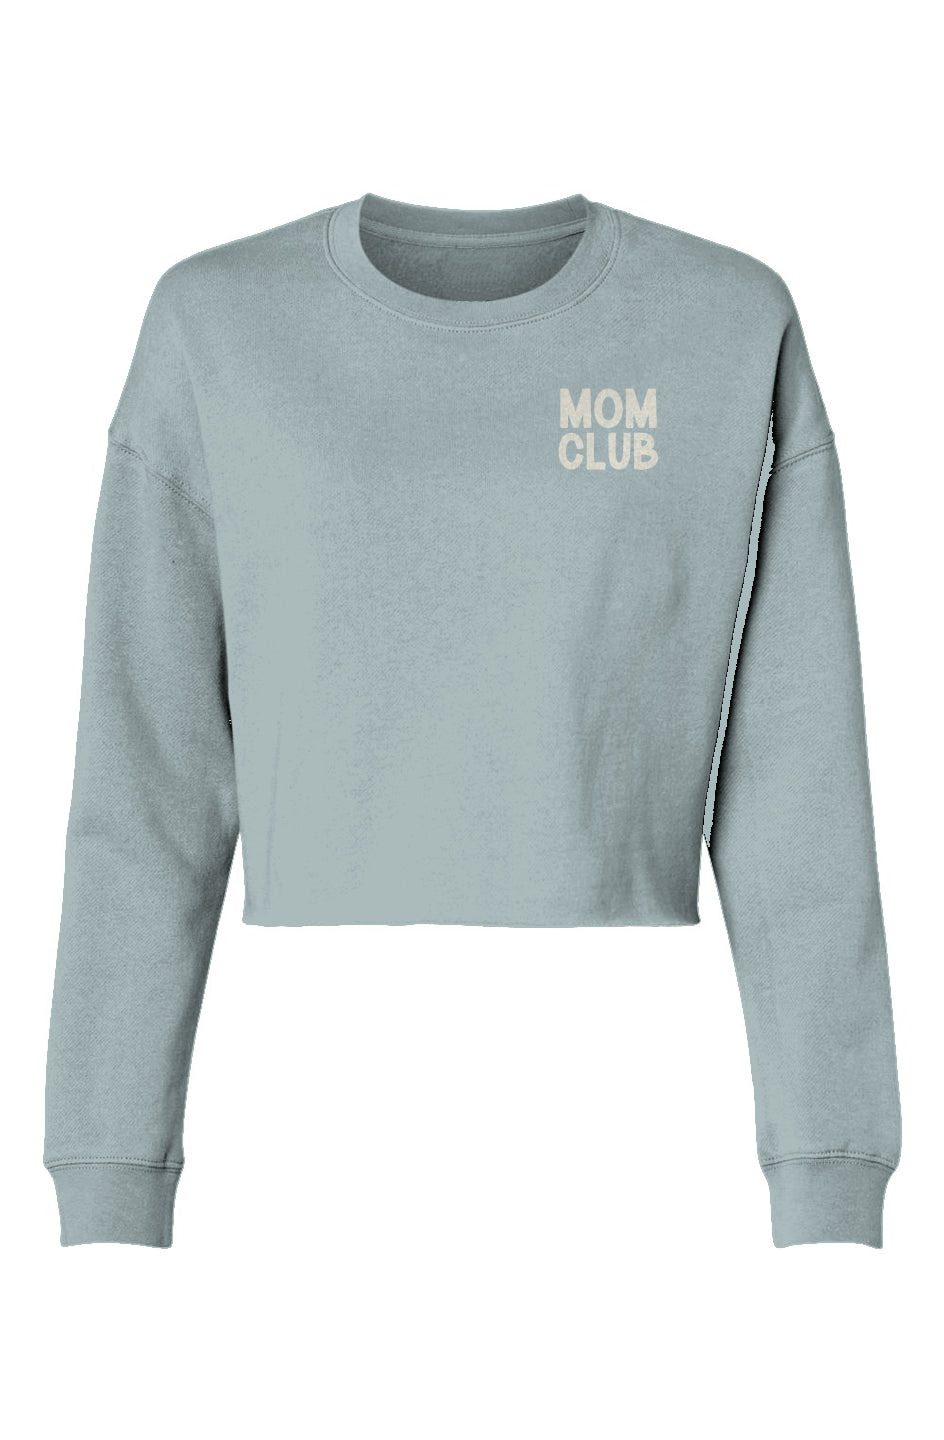 MOM CLUB EMBROIDERED CROP CREW